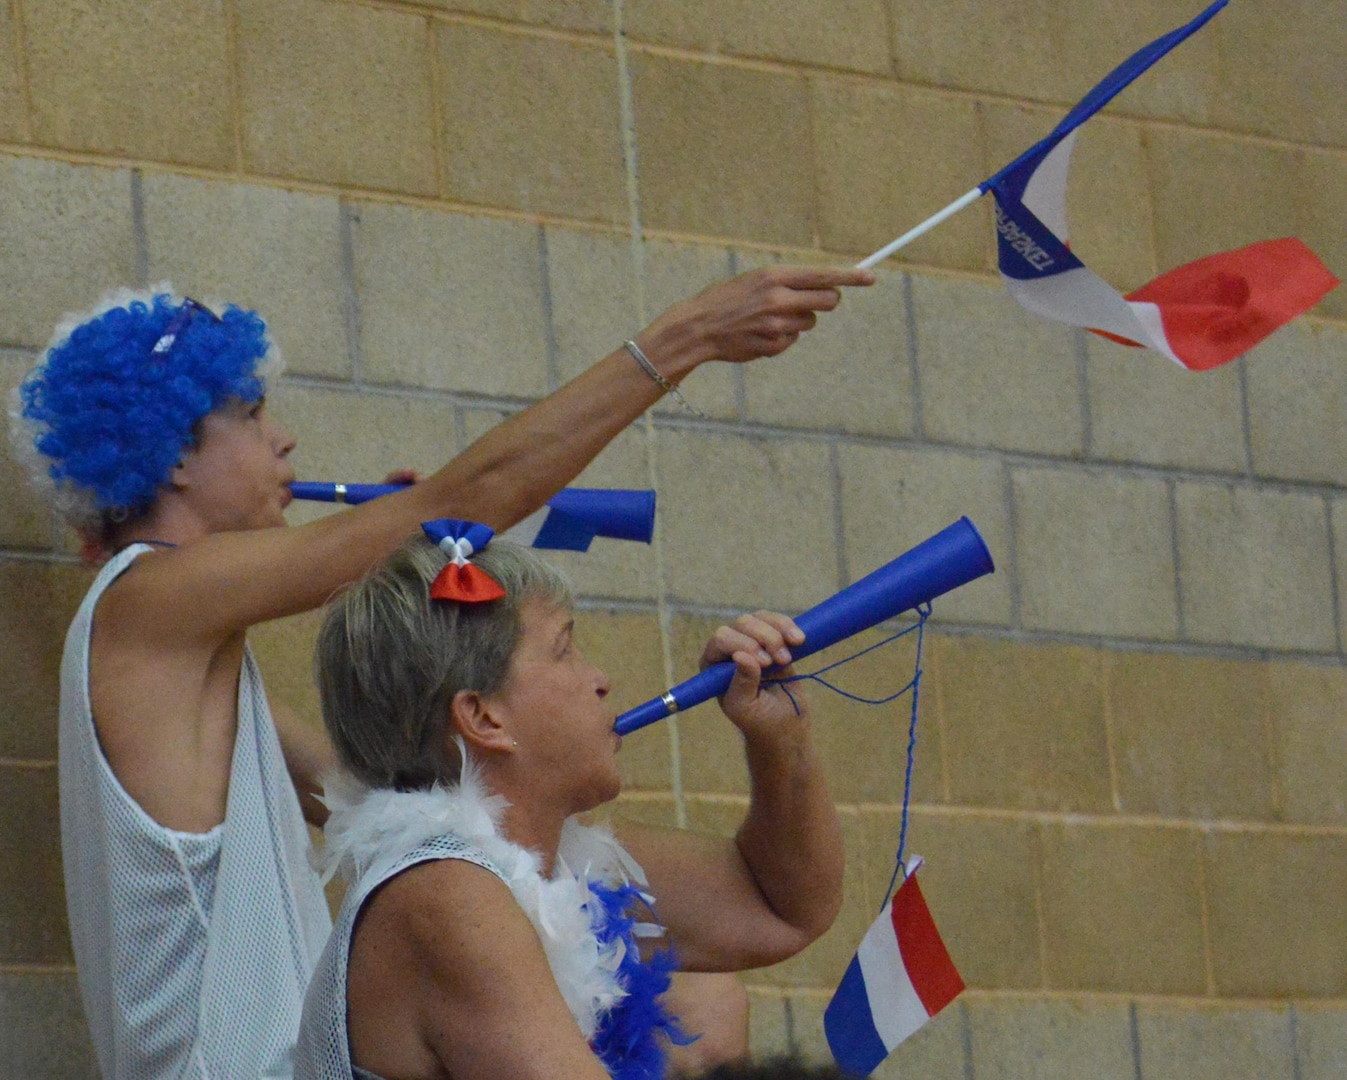 French fans blow their horns and wave their nation's flag after their team scores during day two of the CISM Women's Basketball Championship at Camp Pendleton, Calif., July 26, 2016. Despite their support, France lost to Team USA, 85-53.